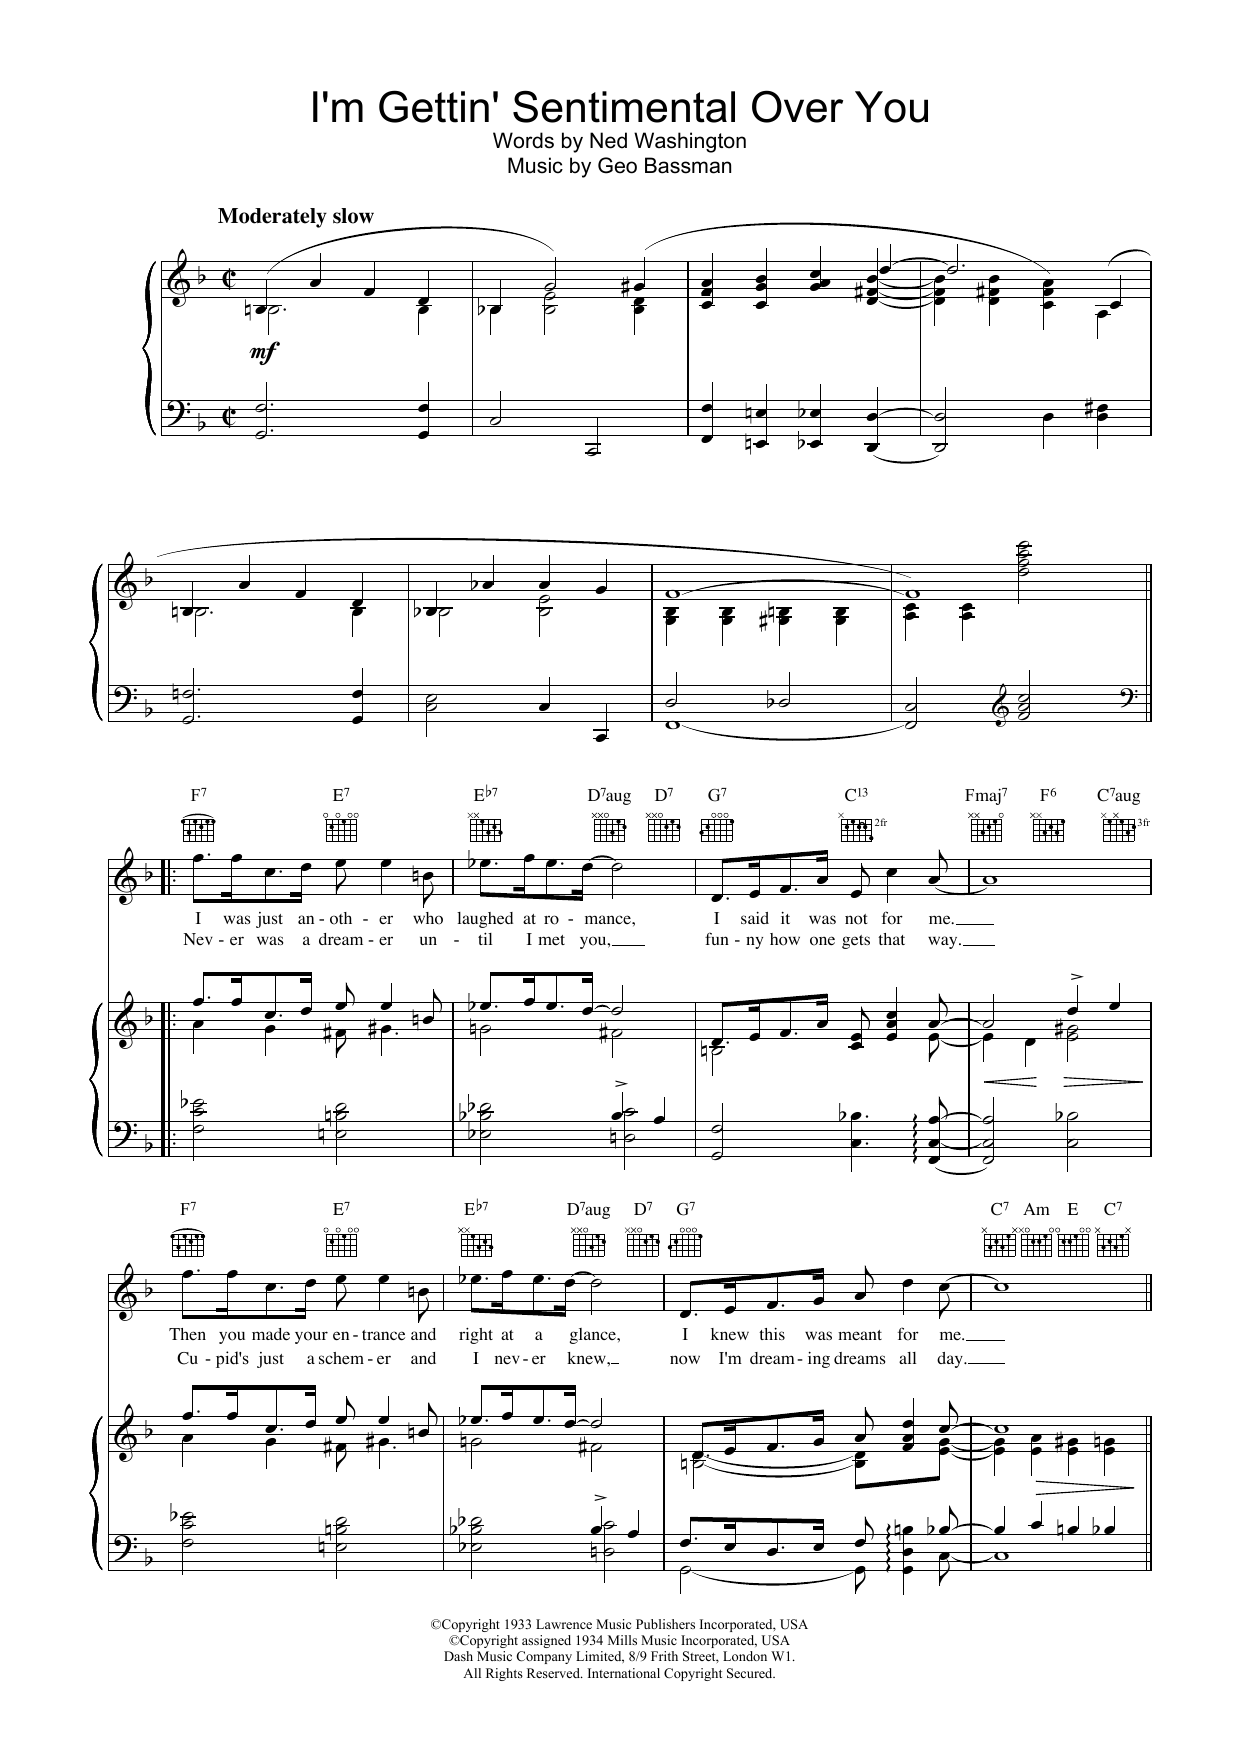 Frank Sinatra I'm Gettin' Sentimental Over You sheet music notes and chords. Download Printable PDF.